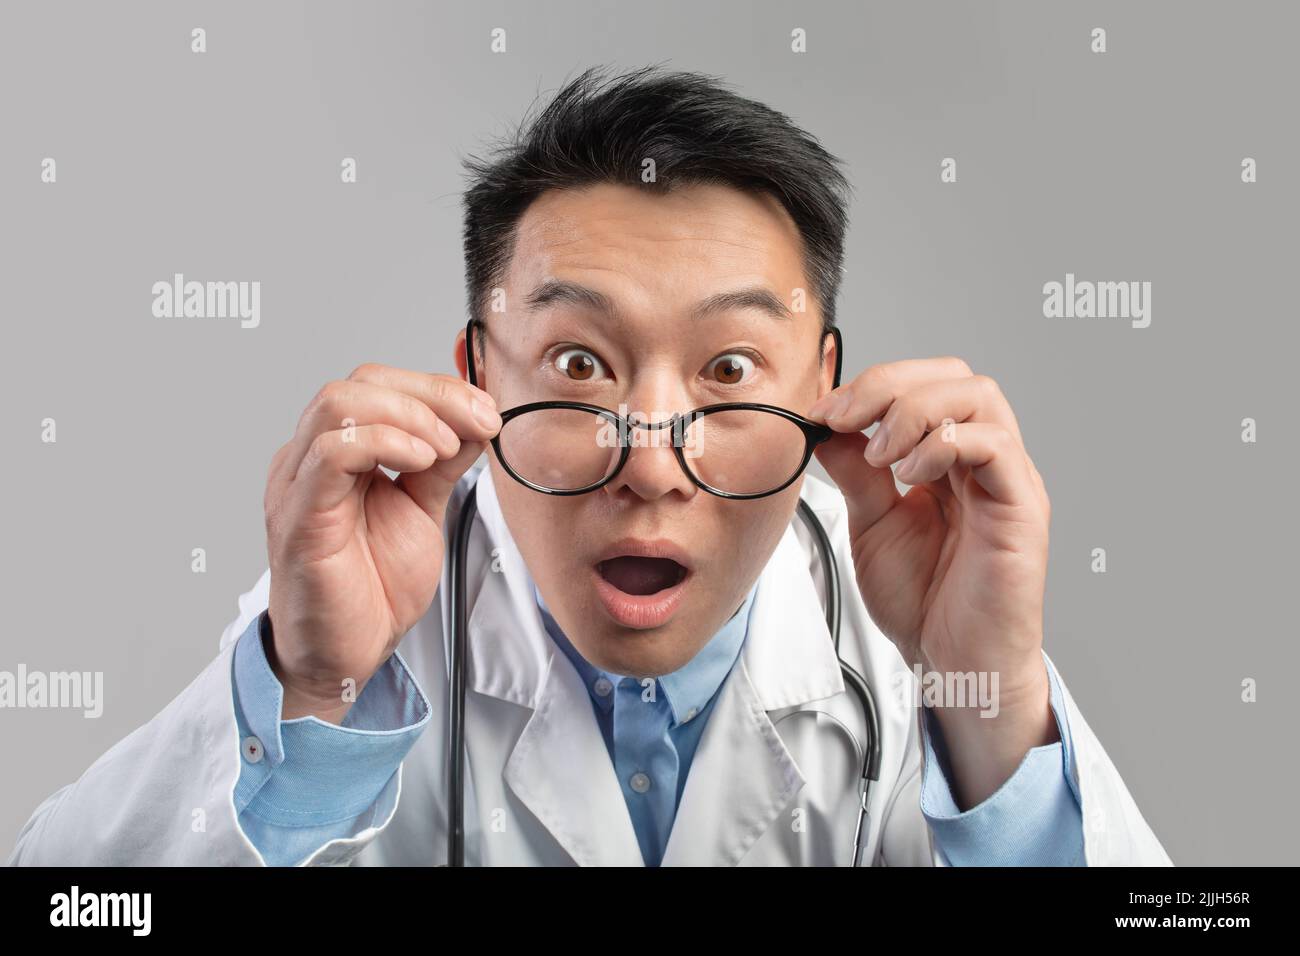 Portrait of shocked excited funny adult asian man doctor in white coat with open mouth, takes off glasses Stock Photo